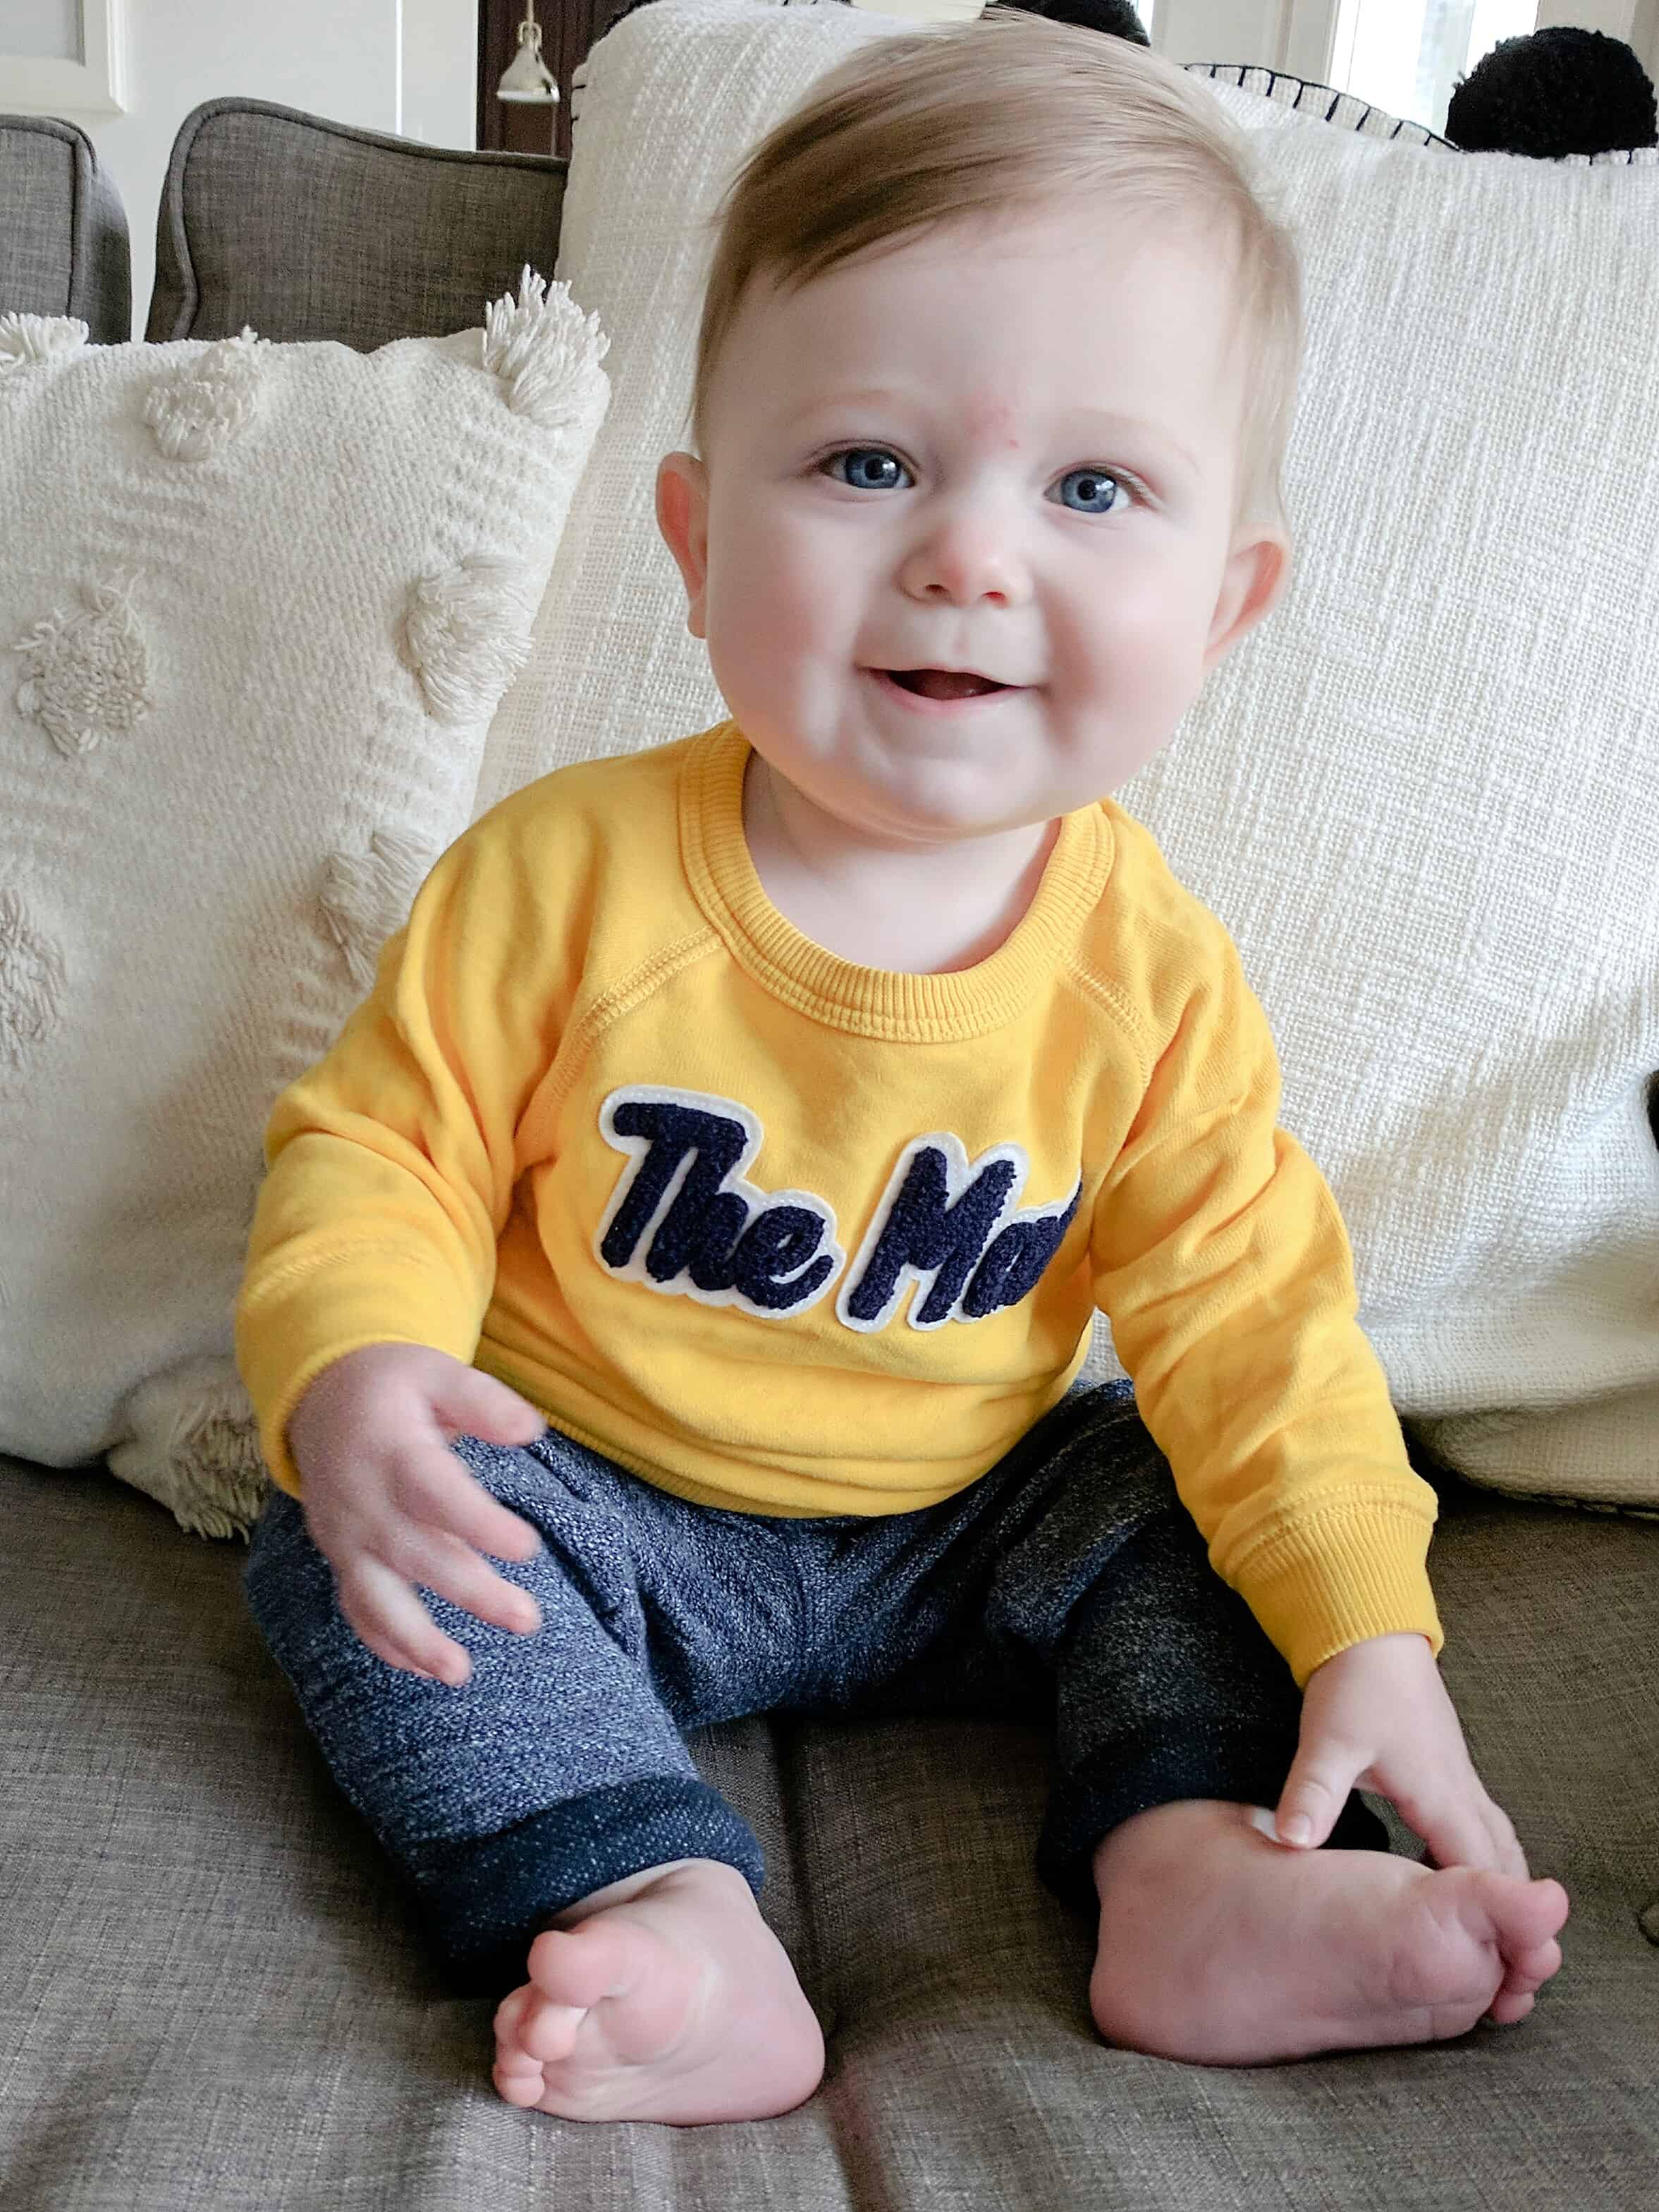 baby boy in yellow sweatshirt on couch